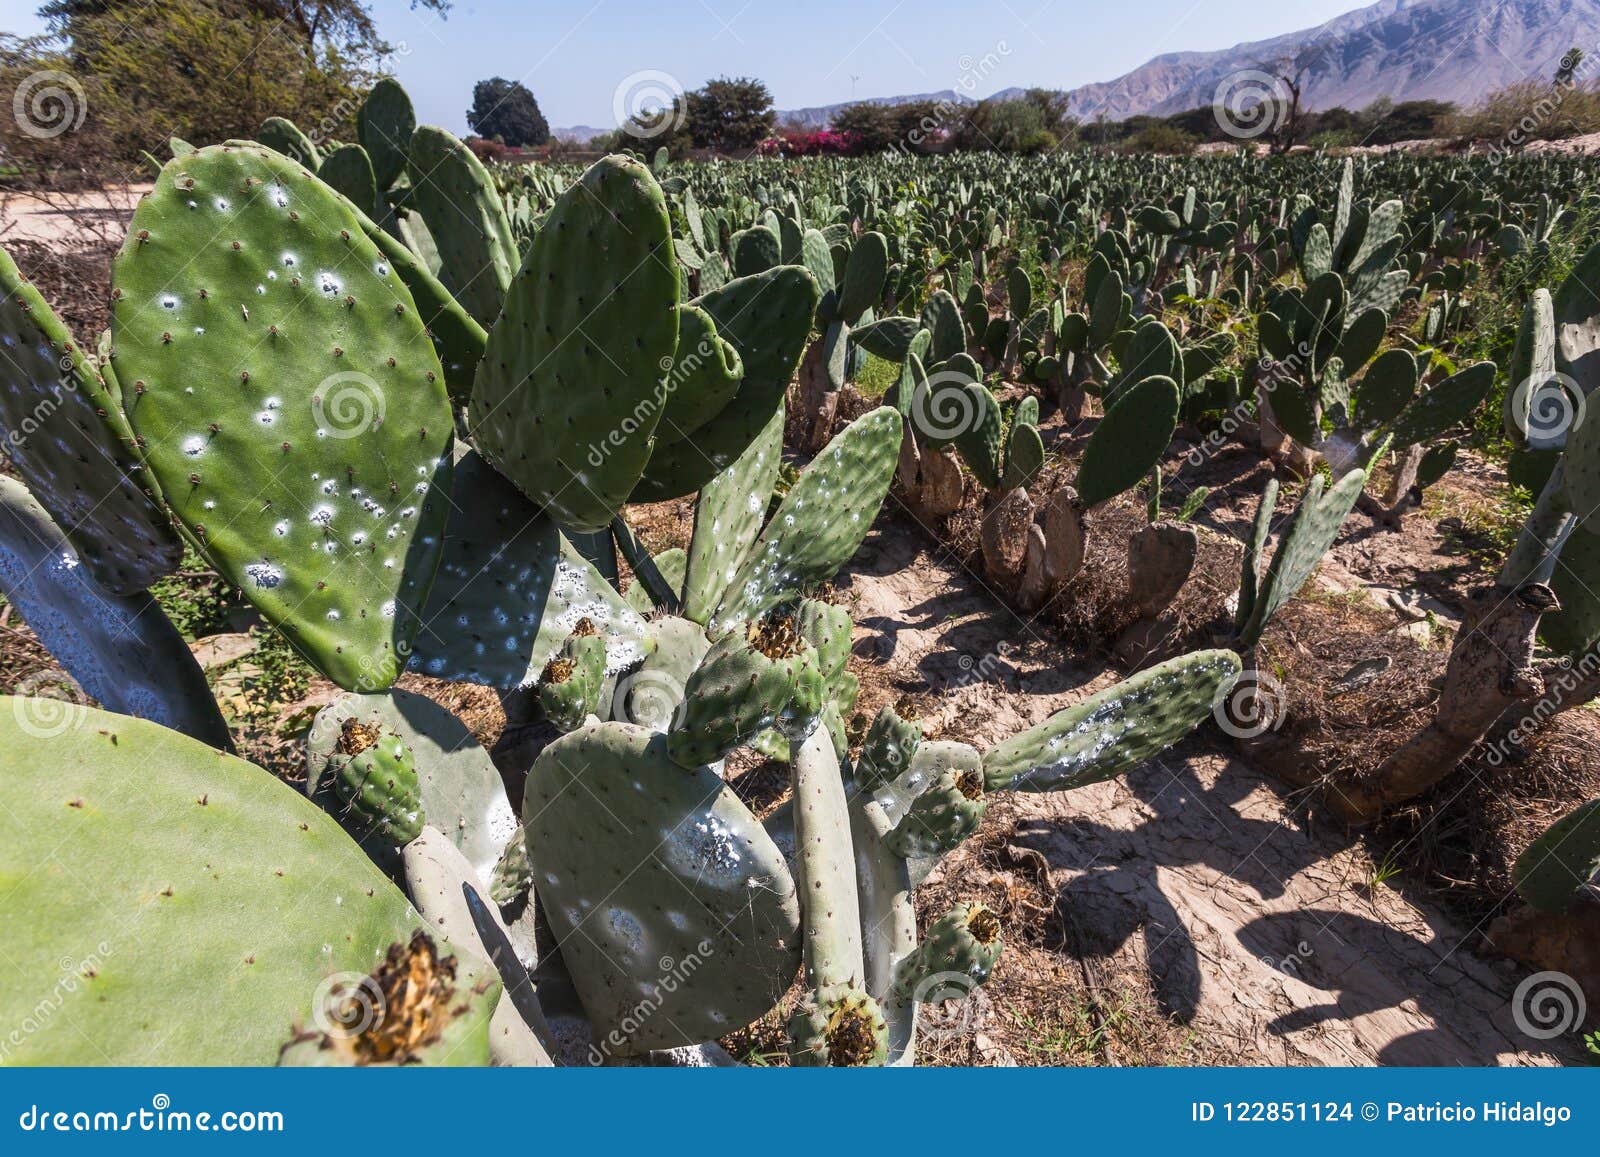 cactus plantation to raise the cochineal